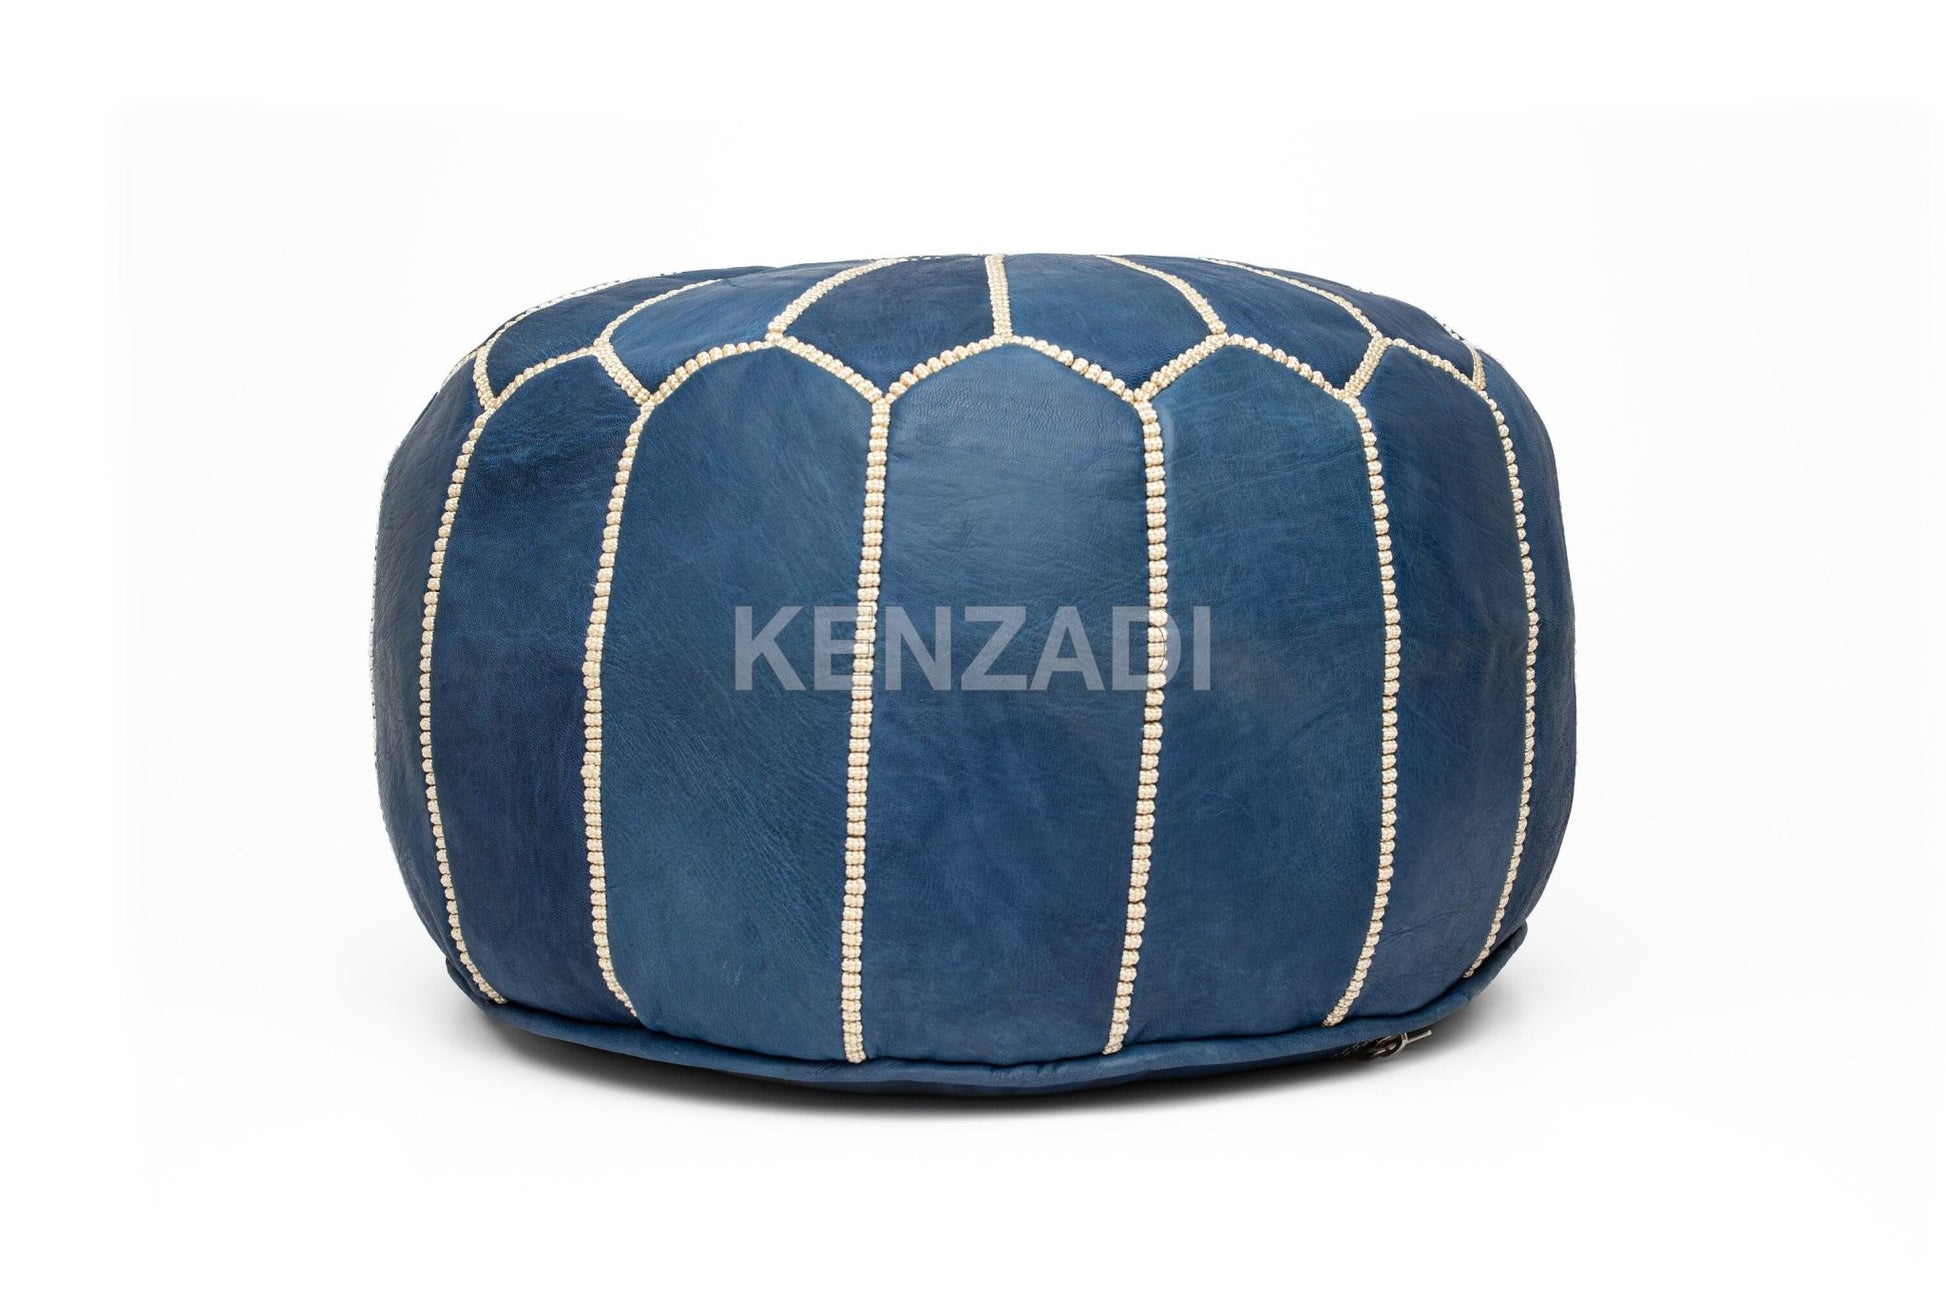 Authentic round Moroccan leather pouf in sewn TAN leather with blue and beige embroidery by Kenzadi